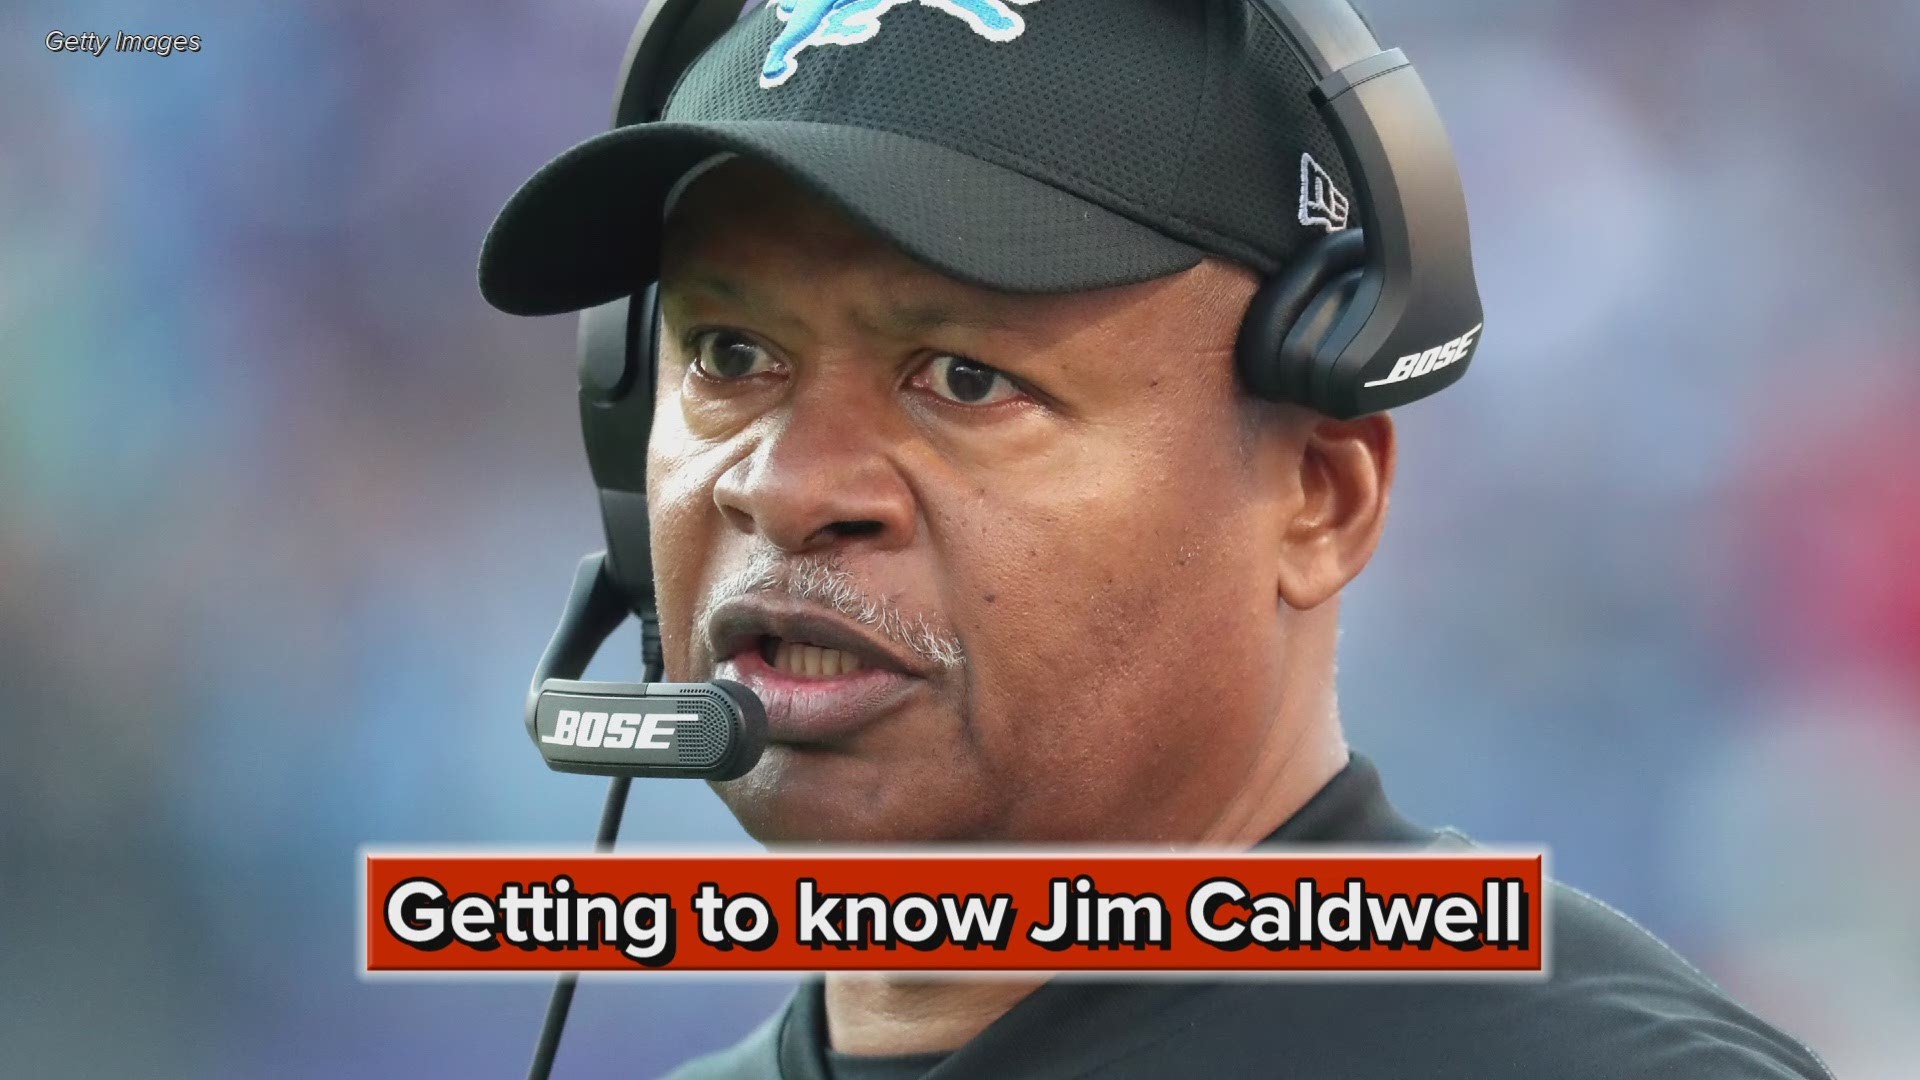 Here is a look at the career of Jim Caldwell, candidate for the Cleveland Browns' head-coaching vacancy.